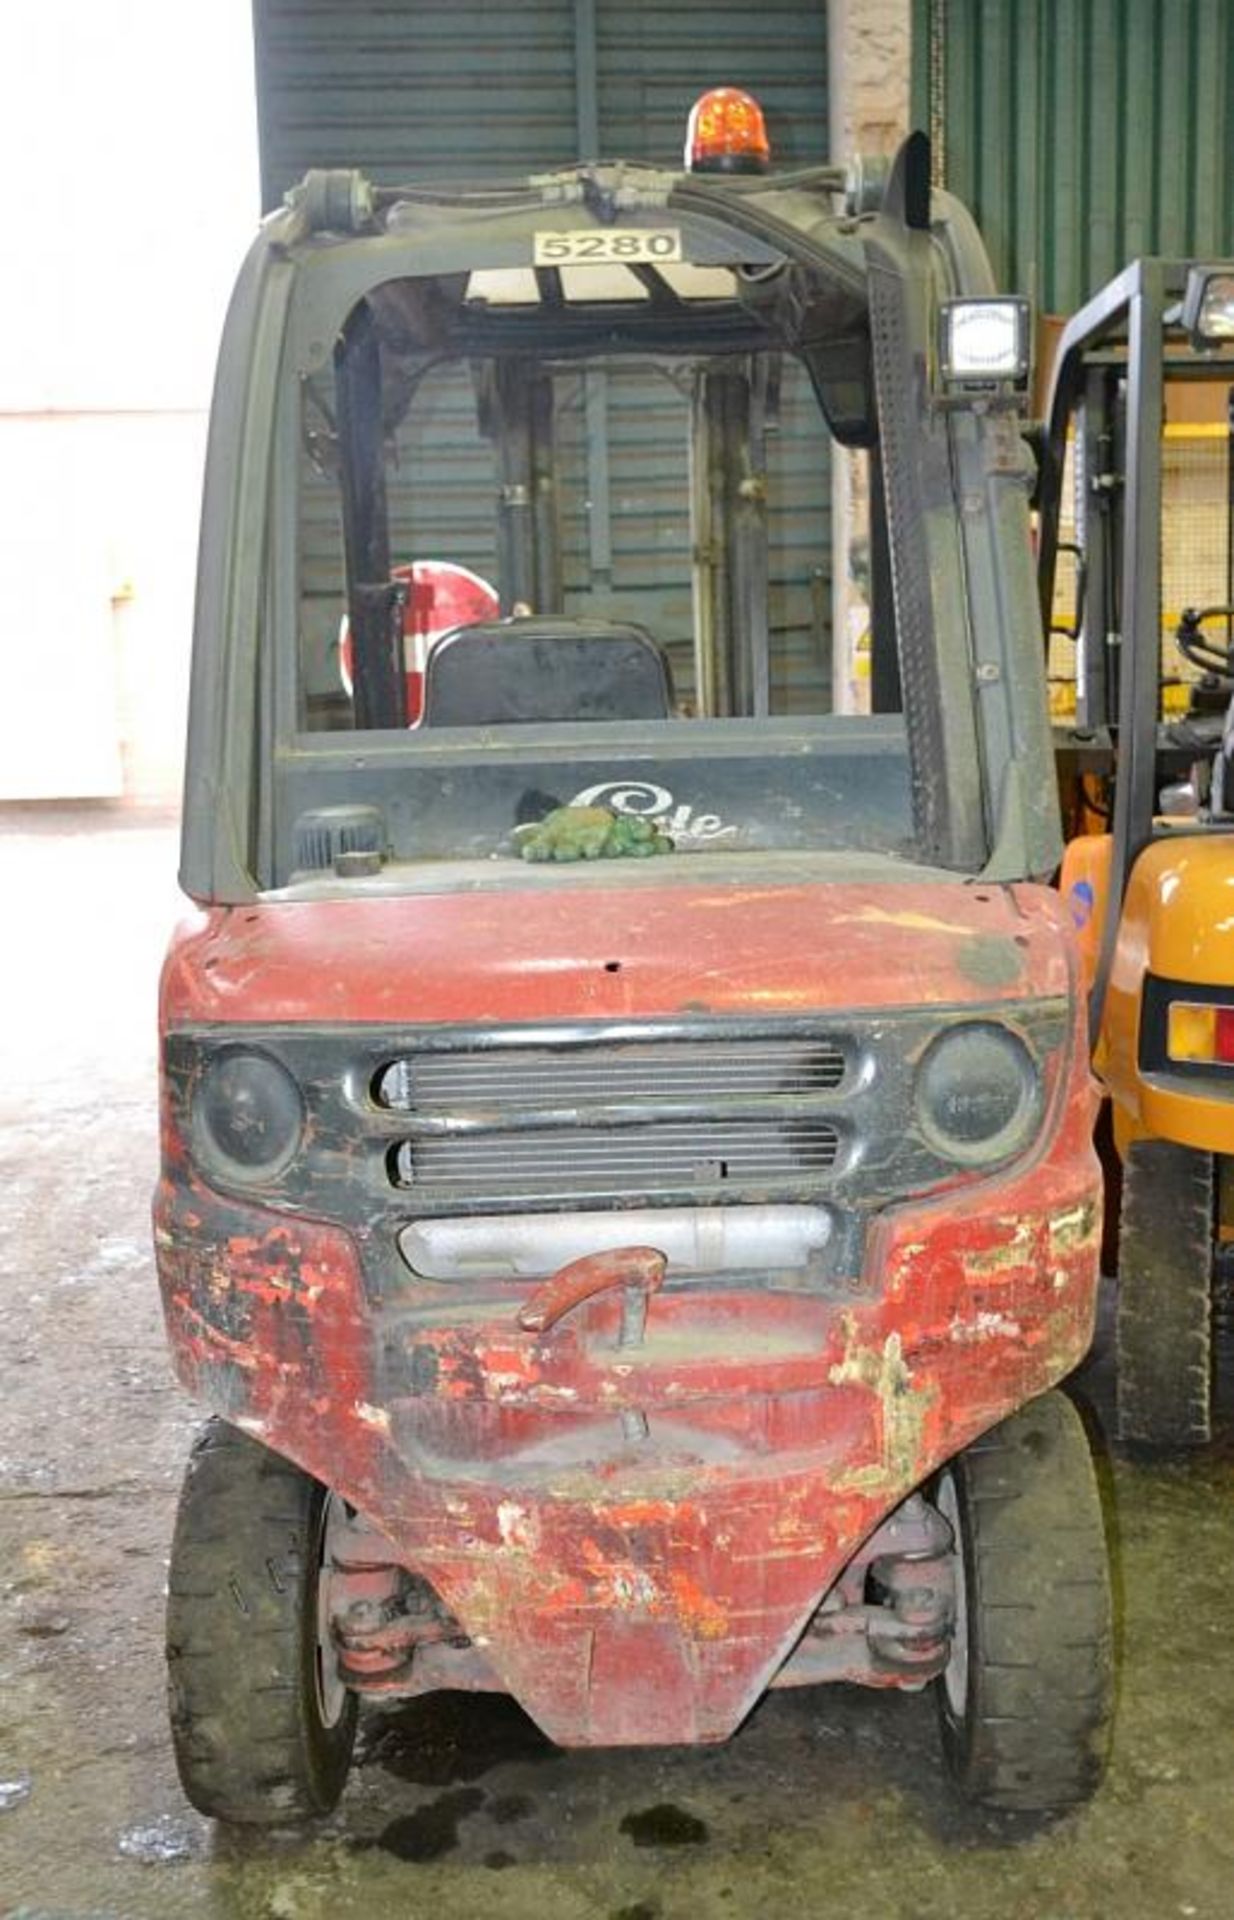 1 x 2003 Lansing Linde H25D Forklift - CL464 - Location: Liverpool L19 - Used In Working Condition - Image 9 of 30